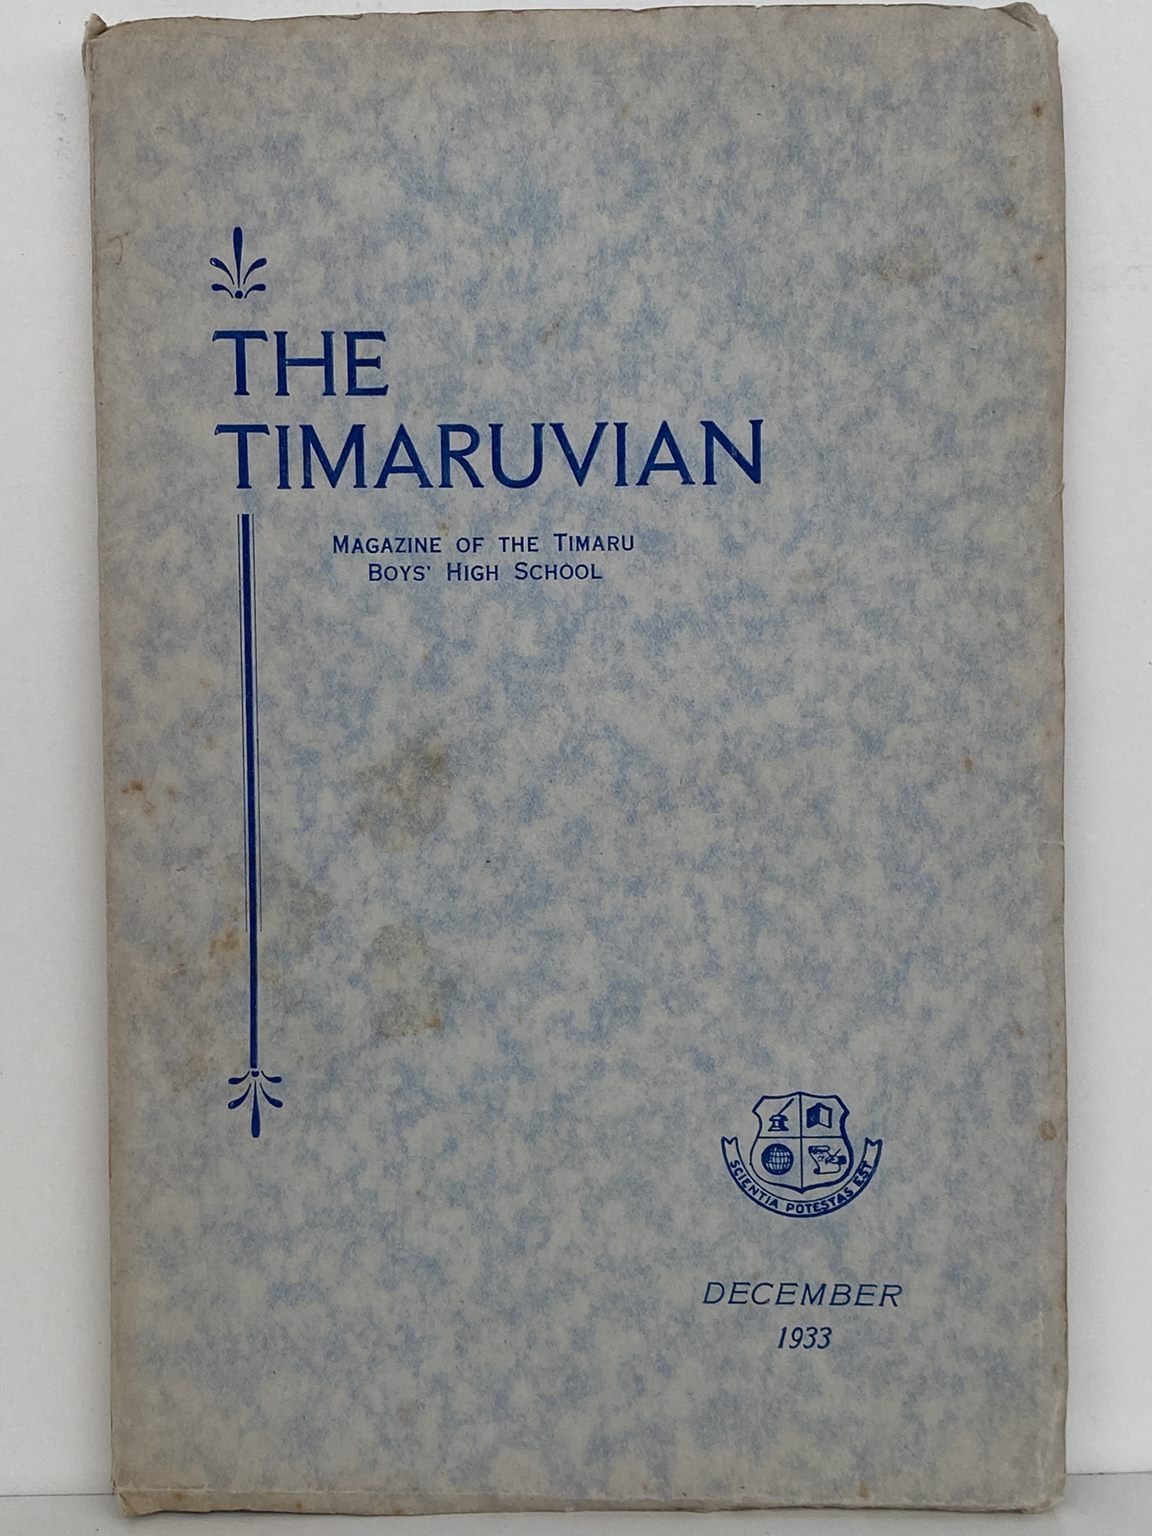 THE TIMARUVIAN: Magazine of the Timaru Boys' High School and its Old Boys' Association 1933